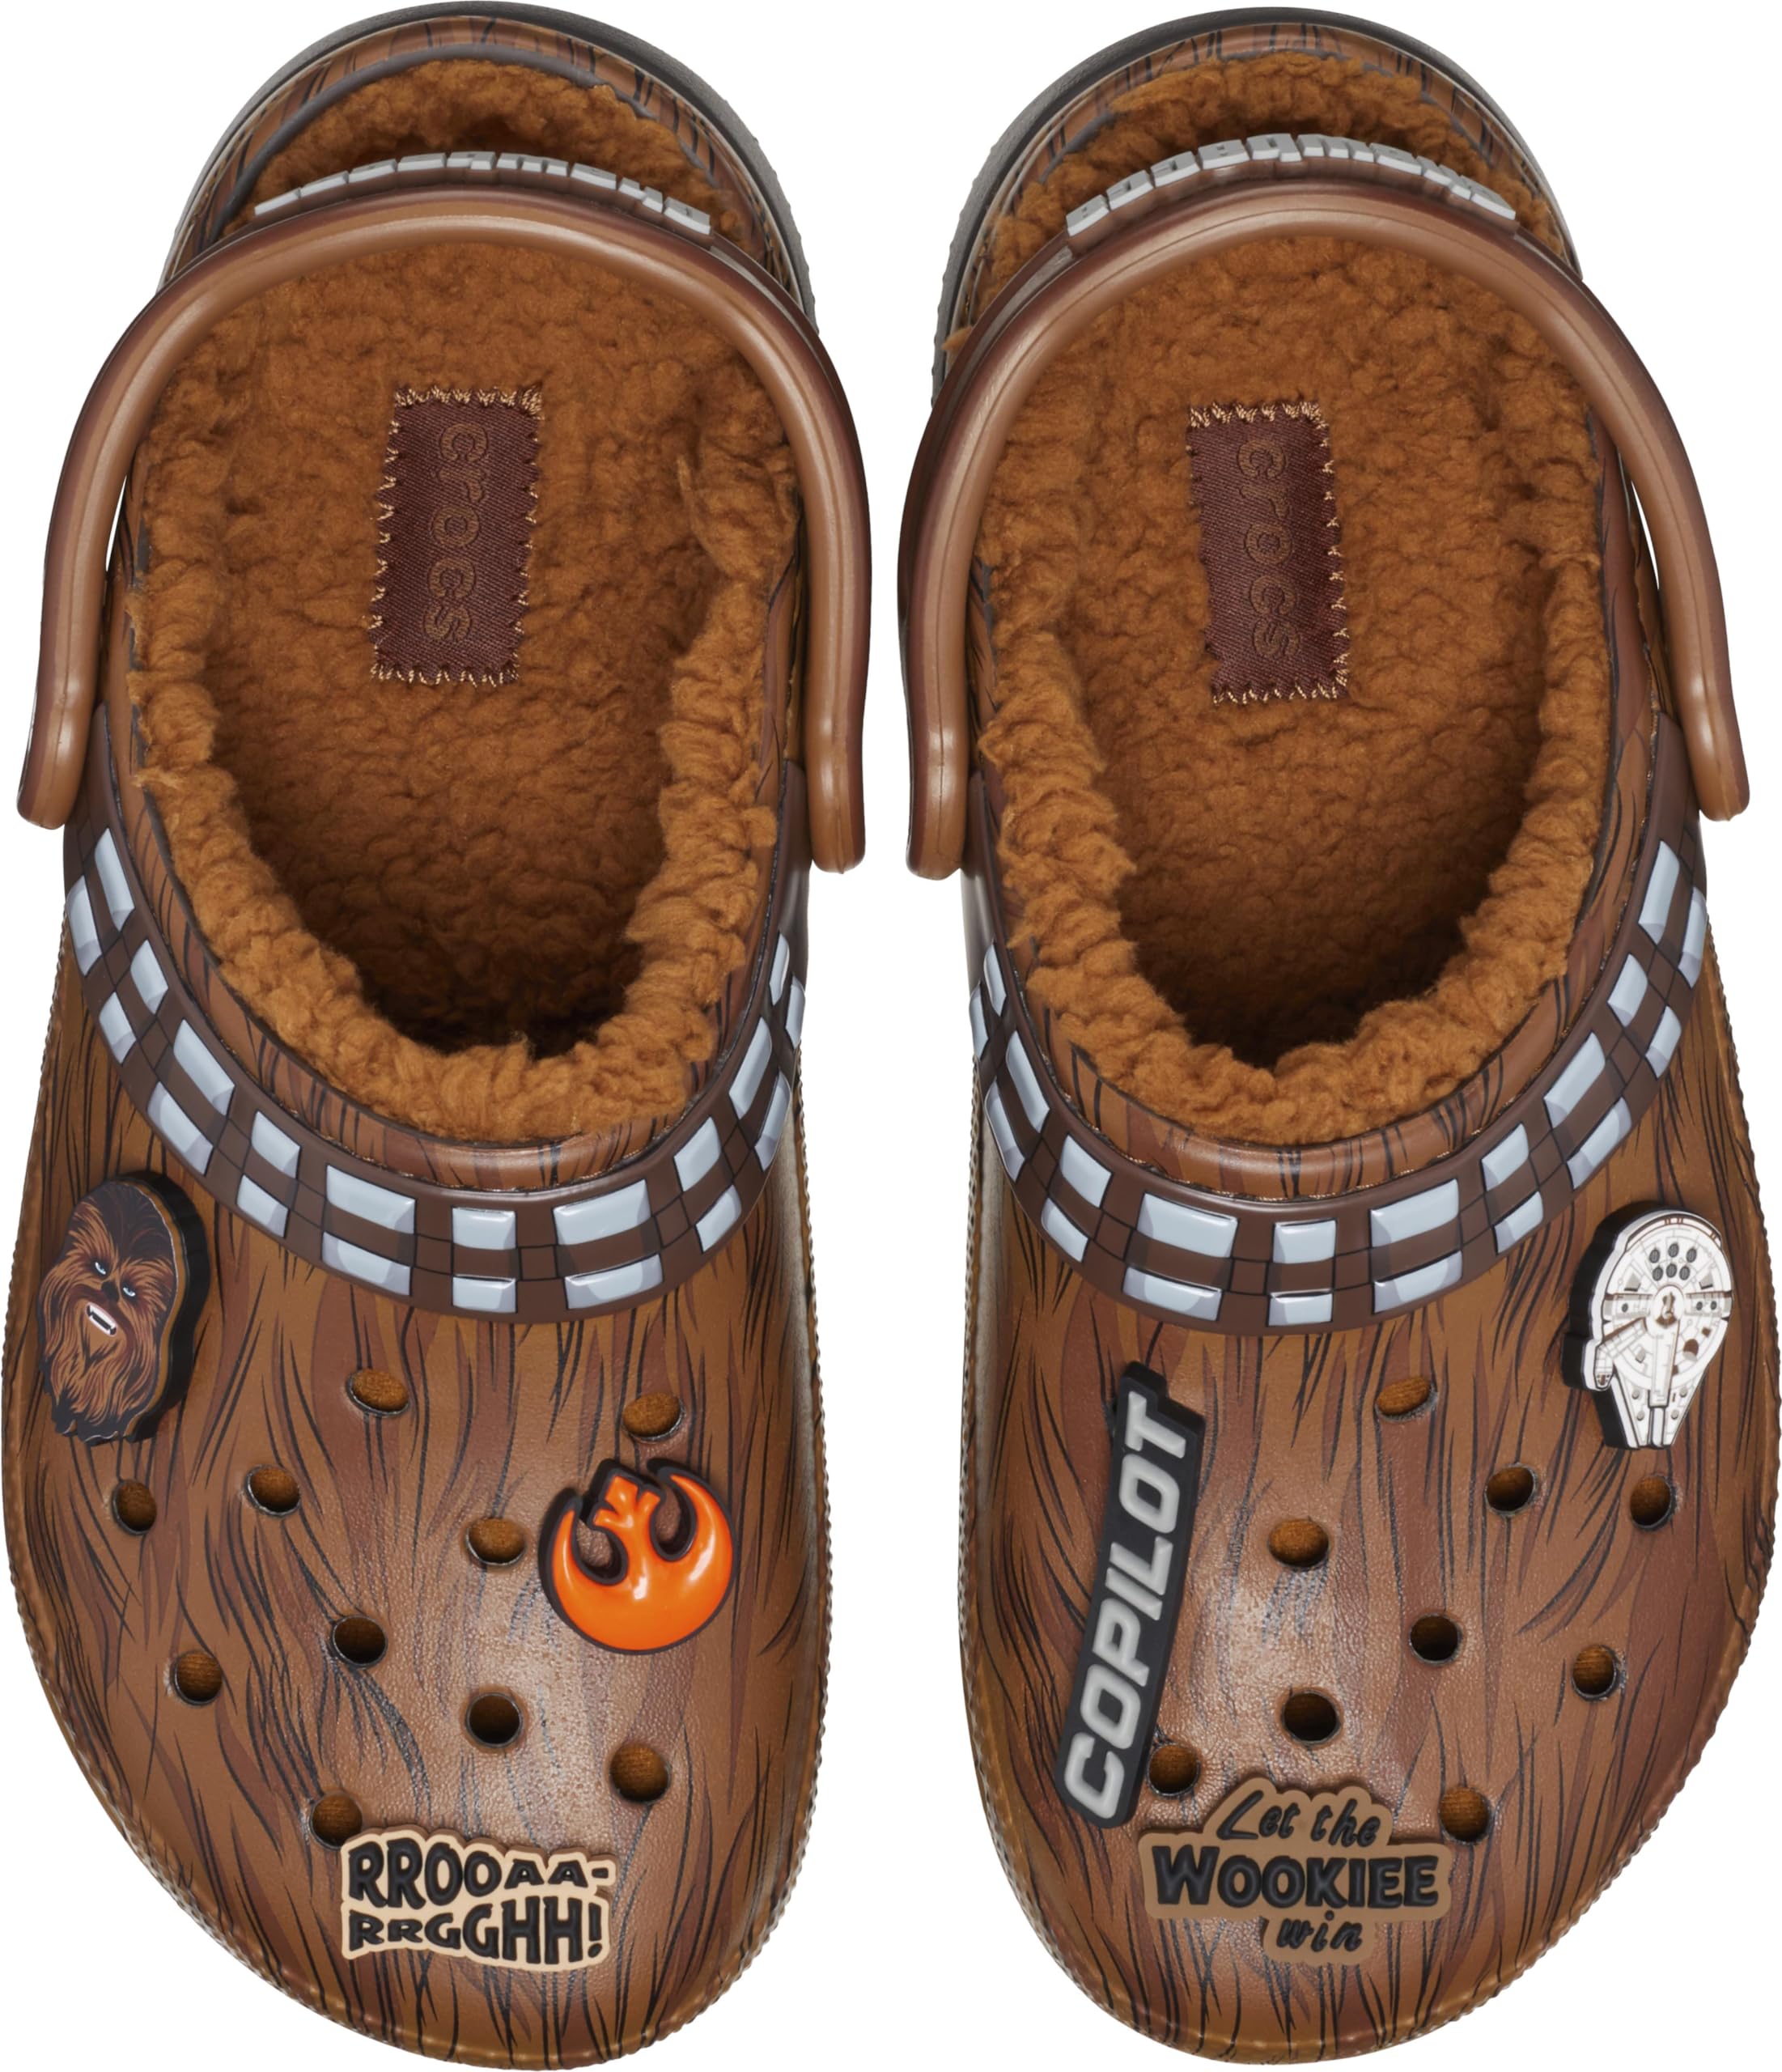 Crocs Unisex-Adult Star Wars Chewbacca Classic Lined Clogs, Fuzzy Slippers